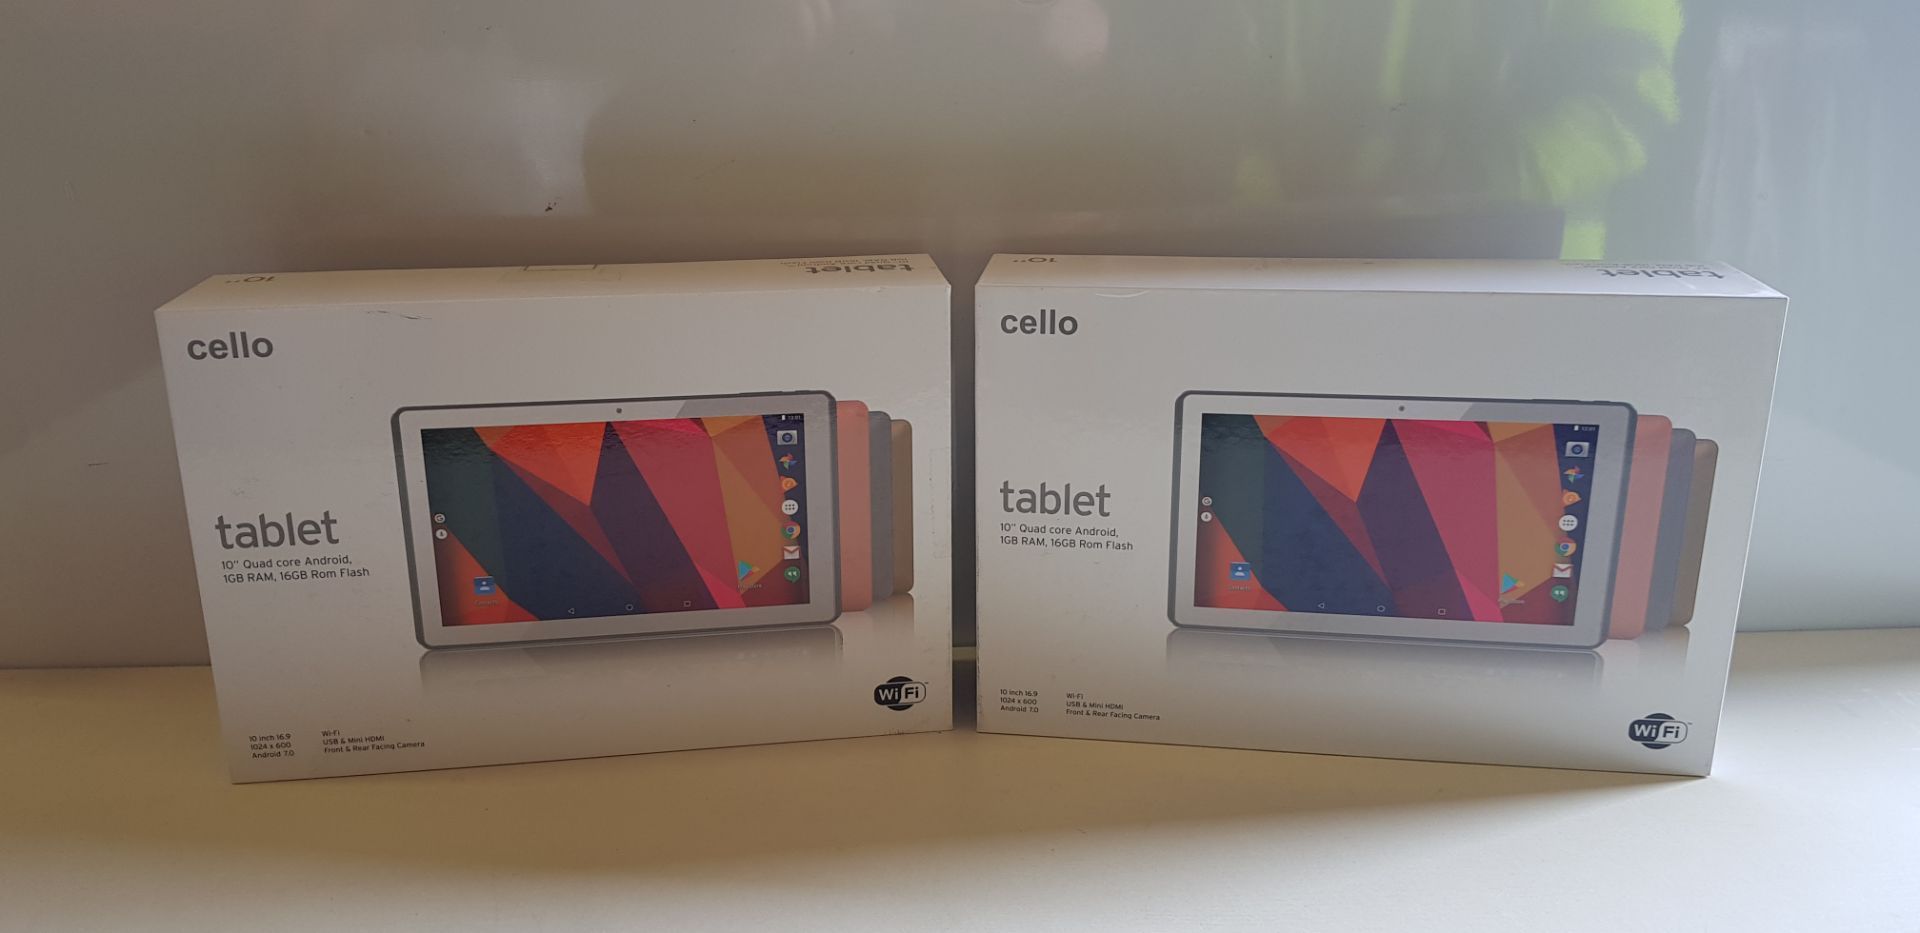 2 X BRAND NEW CELLO TABLETS 10 QUAD CORE ANDROID, 16GB RAM AND 16GB ROM FLASH